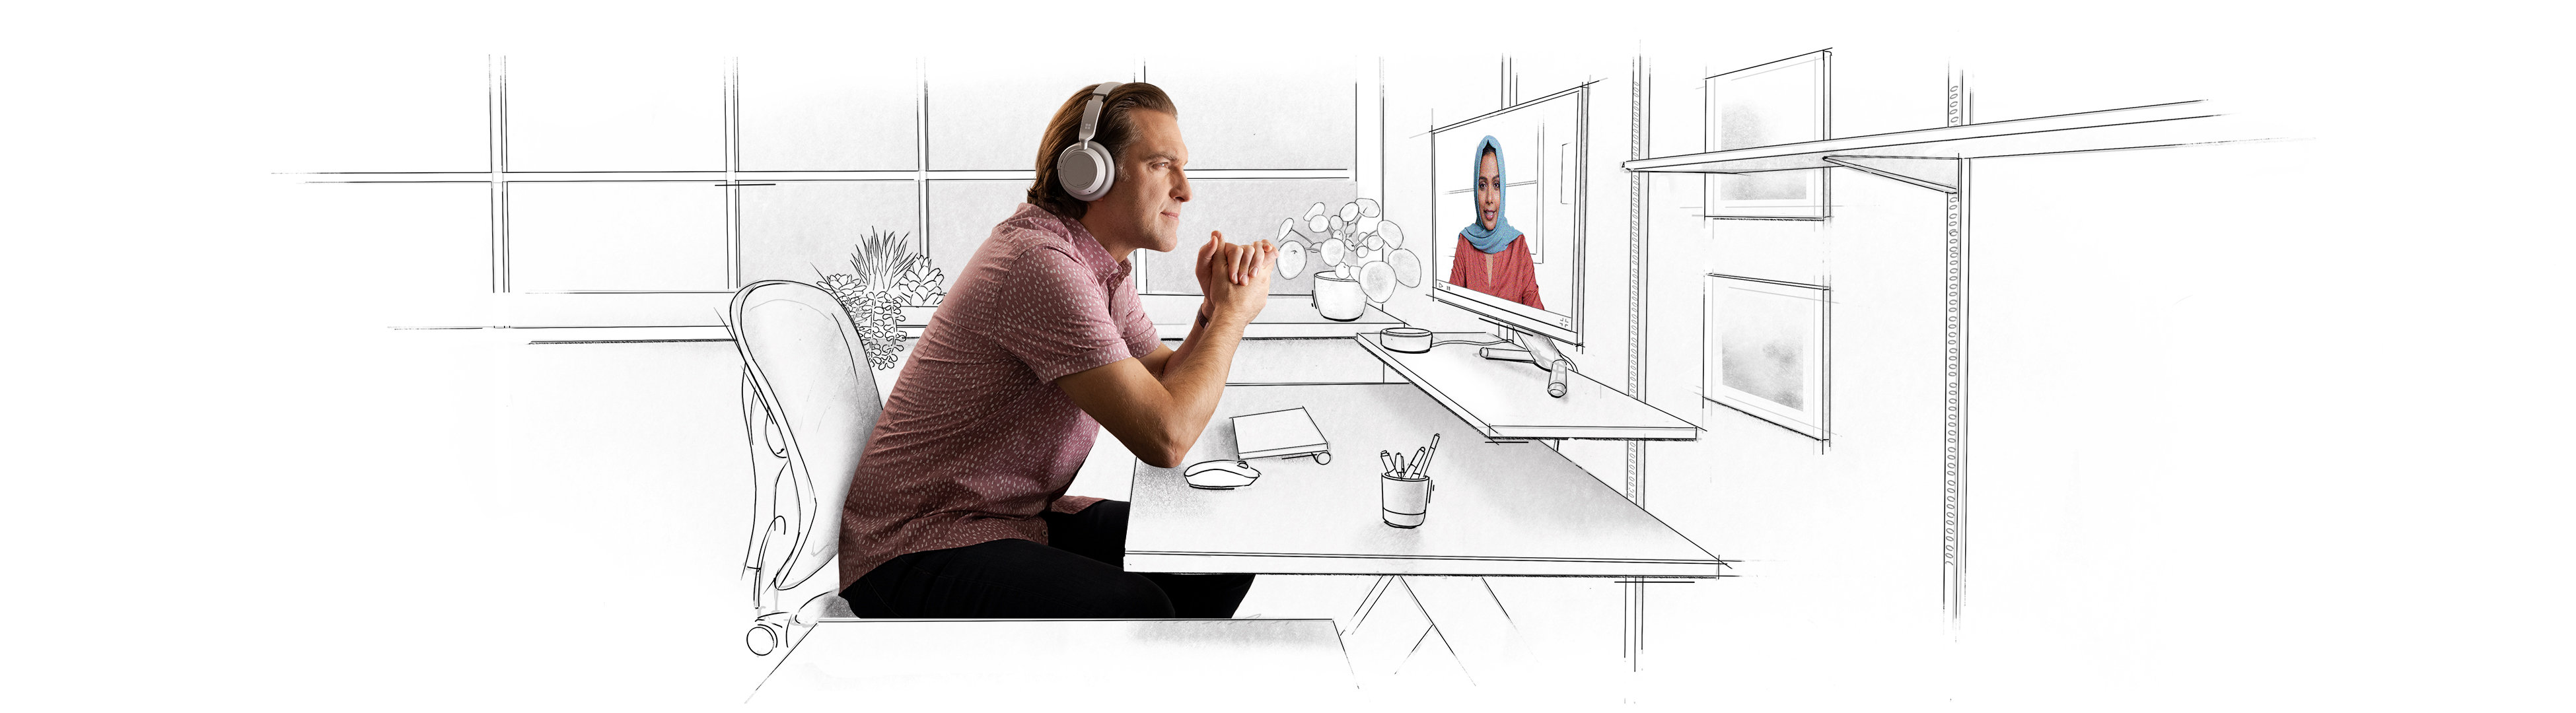 Two coworkers have a video conference call. One is on screen, and the other is watching with headphones on their computer in a home office. The world around them is sketched; a work in progress.